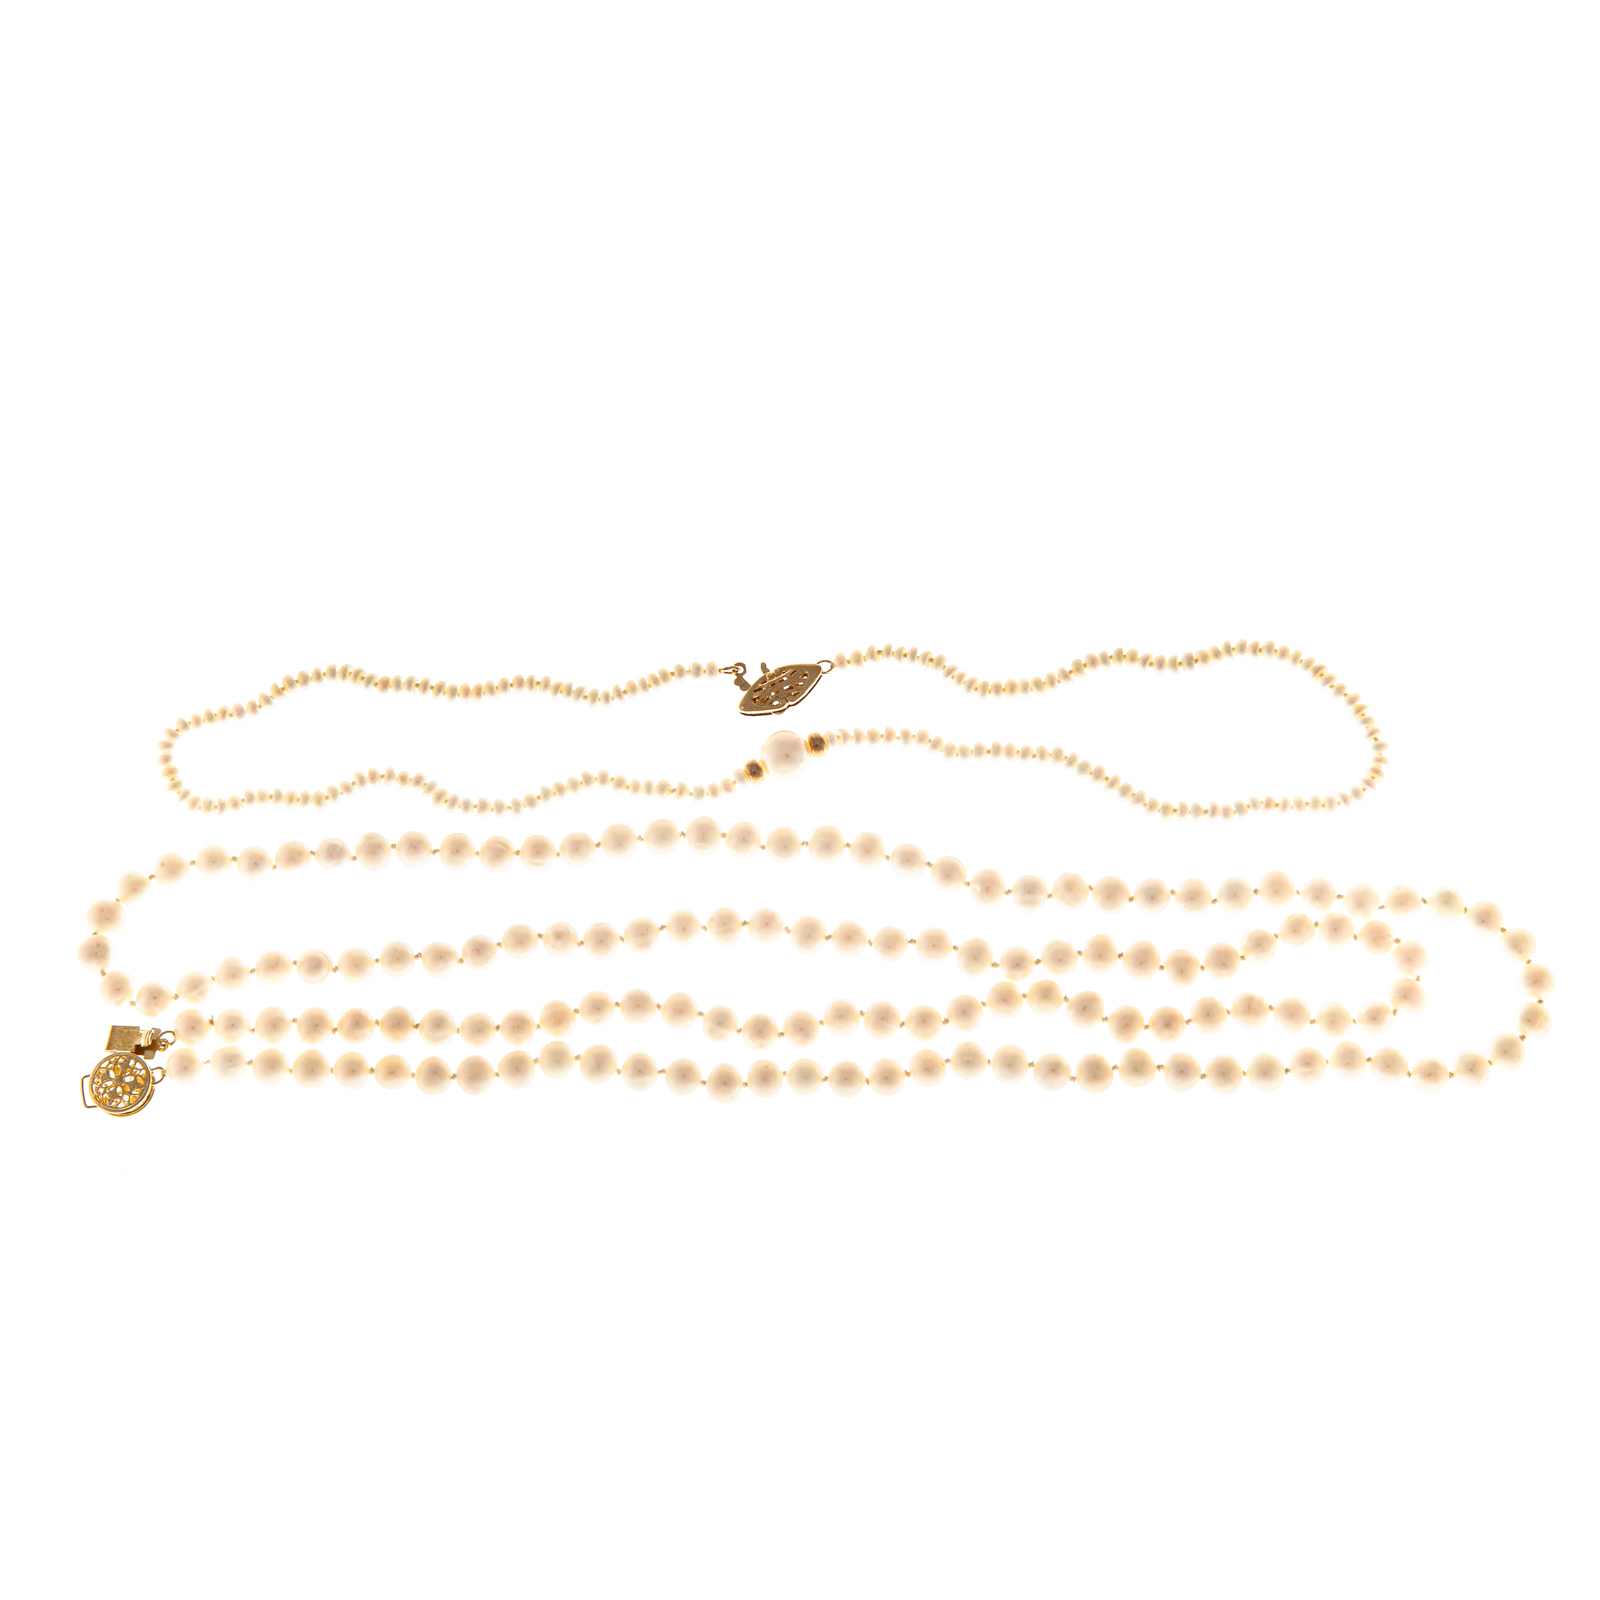 TWO 14K YELLOW GOLD PEARL NECKLACES